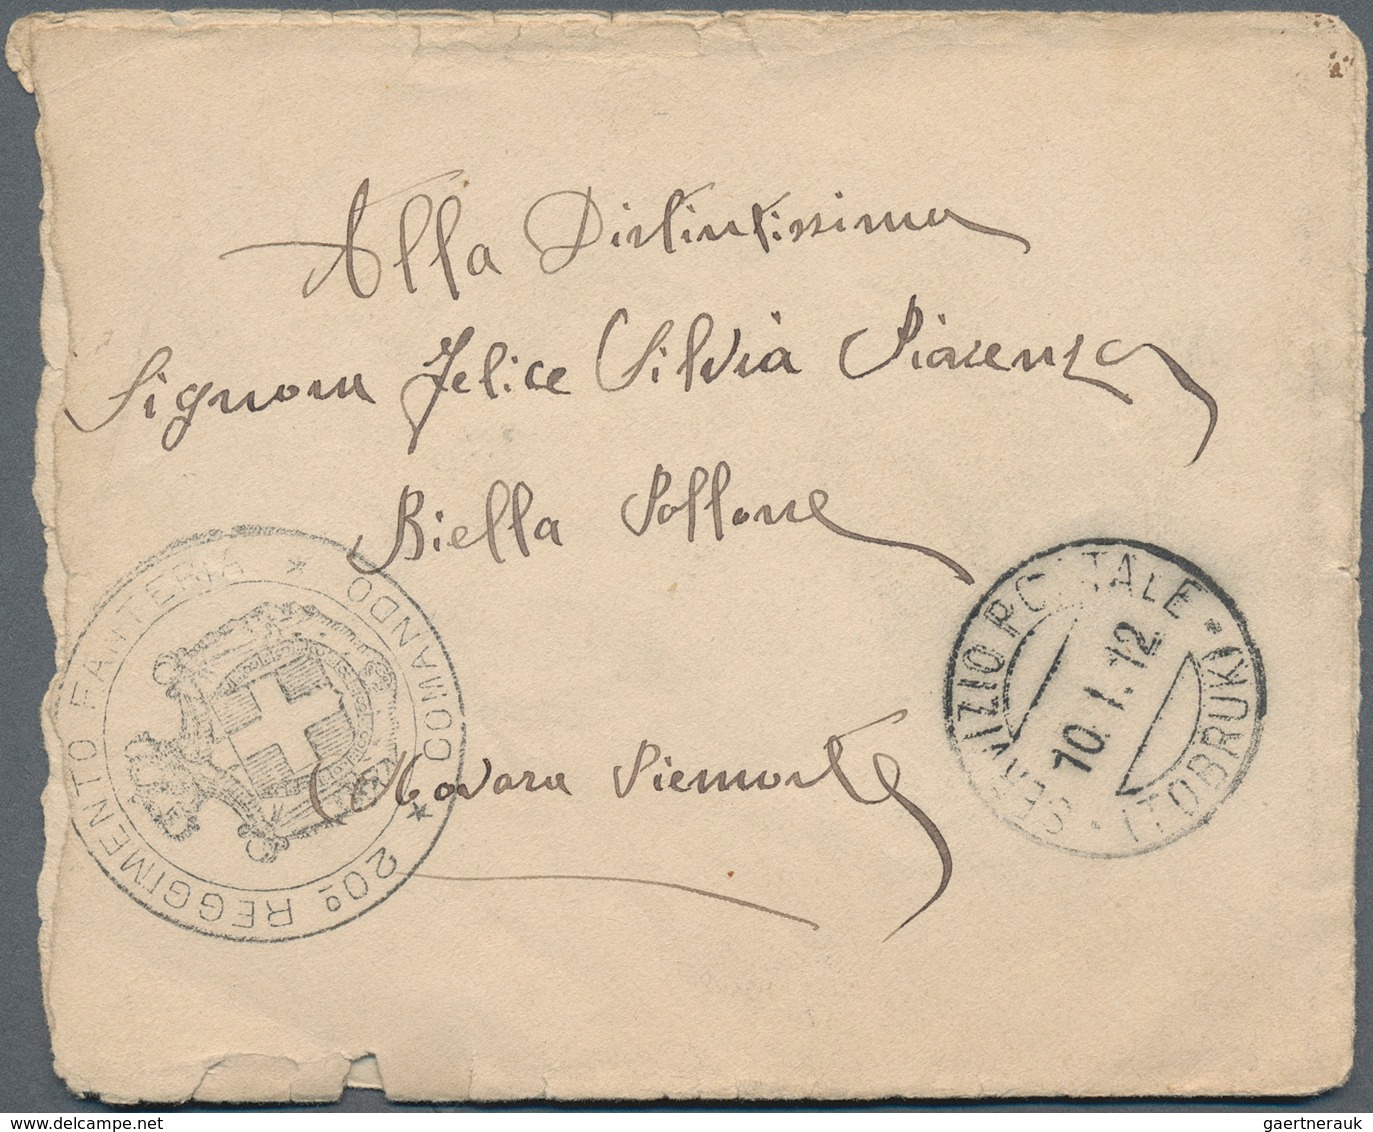 Italienisch-Libyen: 1912/42, 19 Covers And 3 Cards, Many Reduced Or Damaged. - Libyen